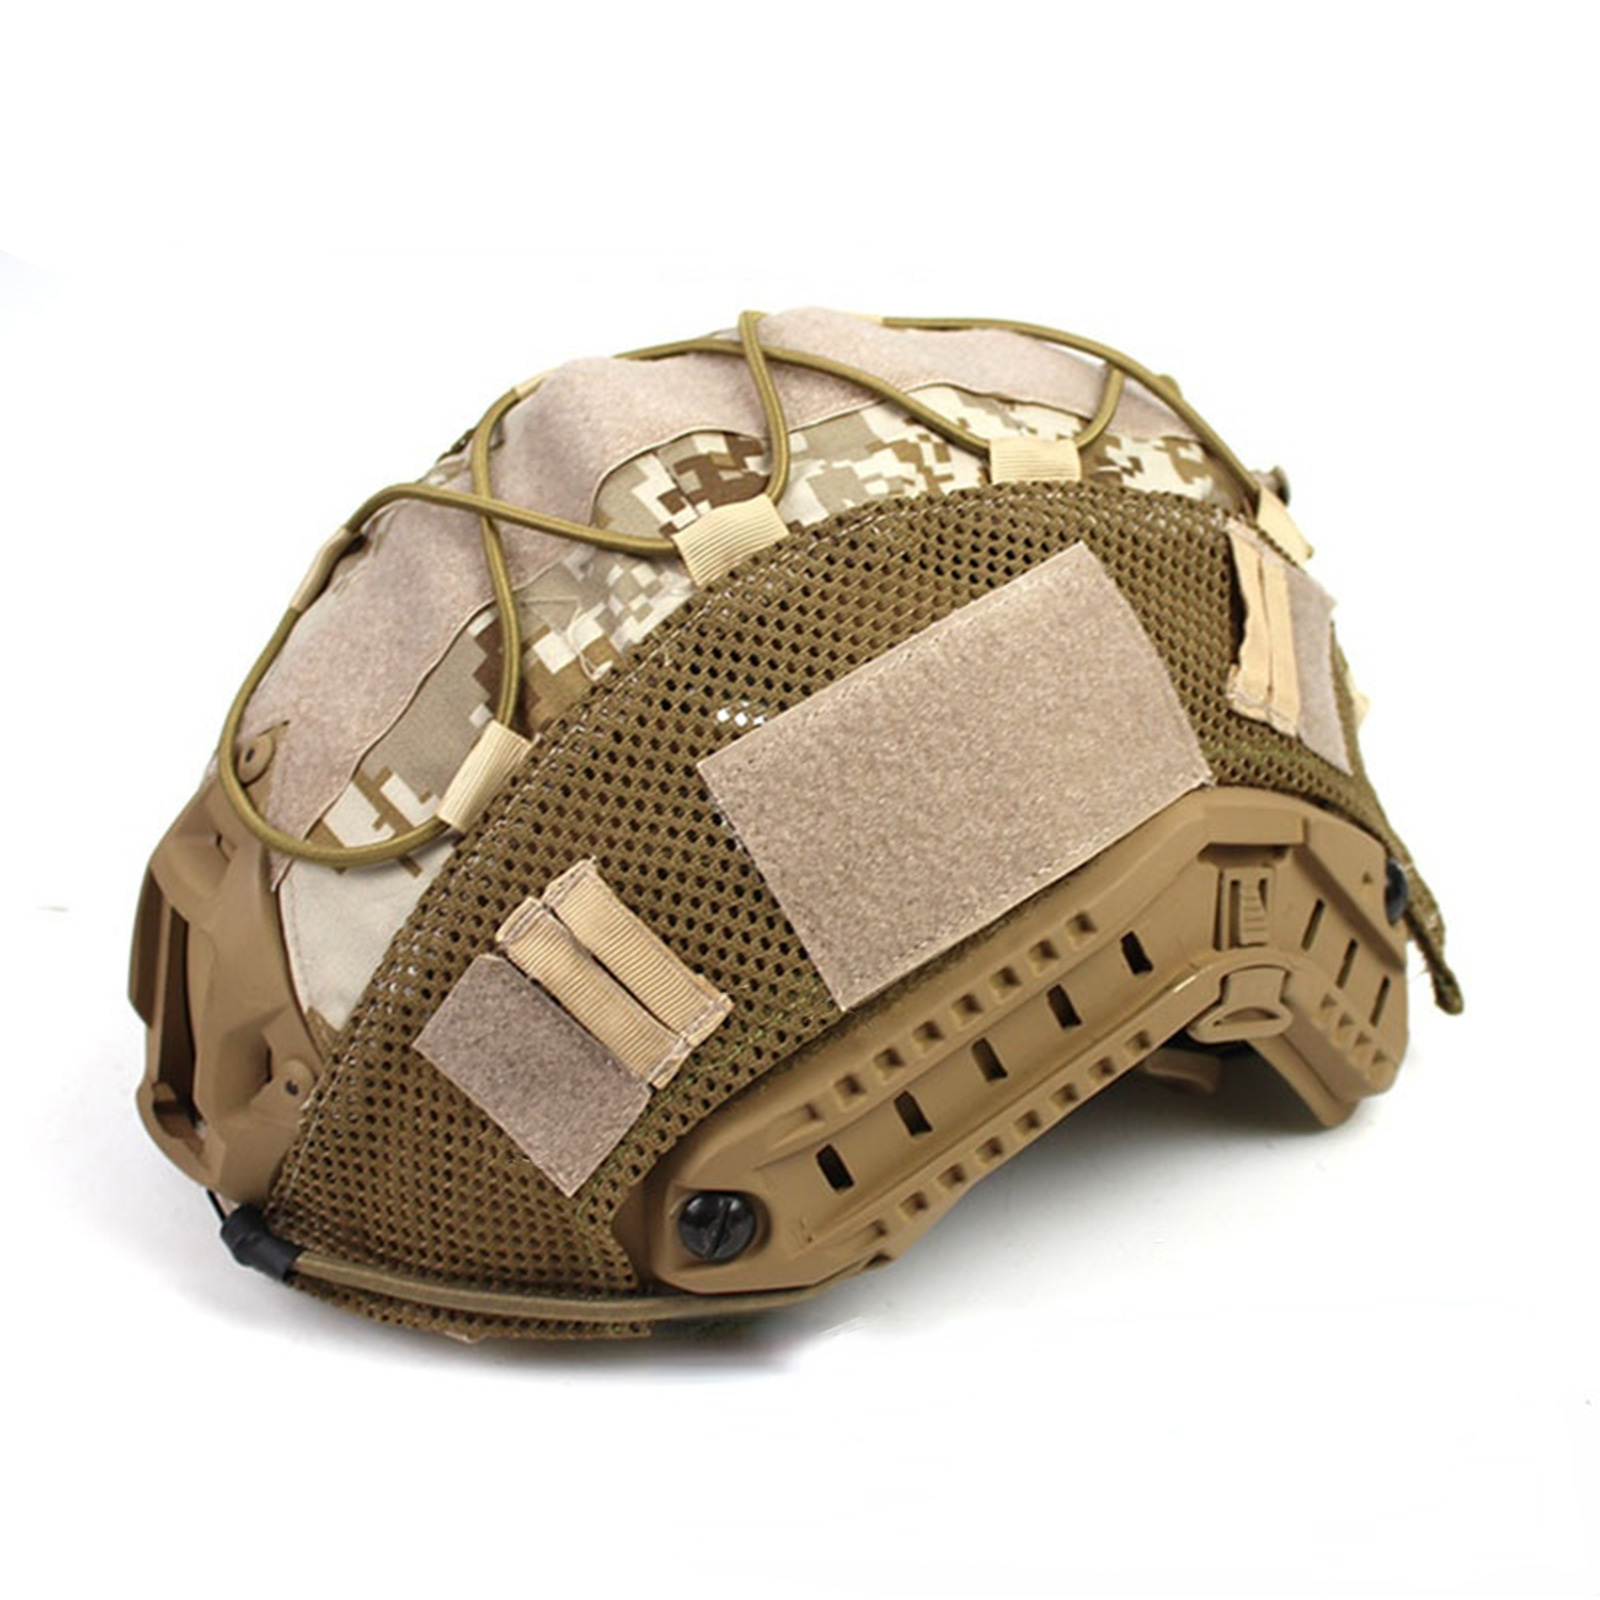 Camouflage Helmet Cover With Quick Adjustable Buckle Airsoft Helmet Case Outdoor Equipment (helmet Not Included) A5